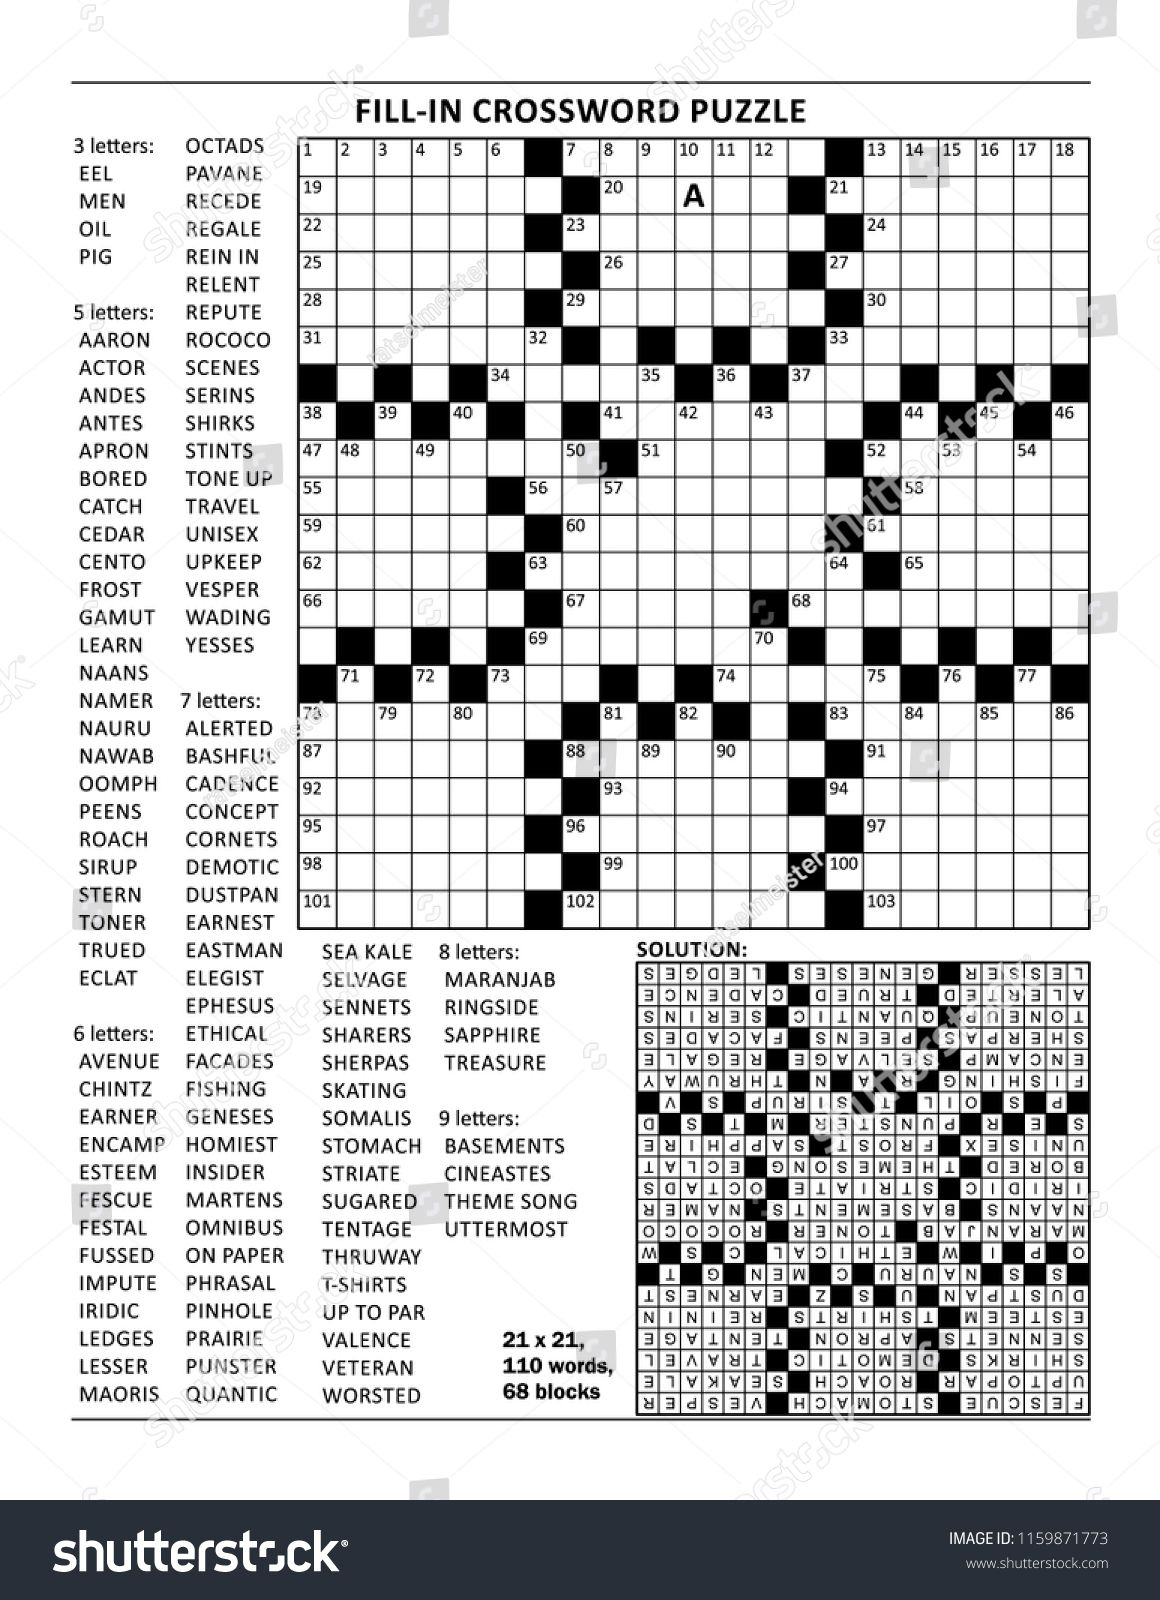 Fill In The Blanks Crossword Puzzle With American Style Grid Of - Printable Blank Crossword Puzzle Grid